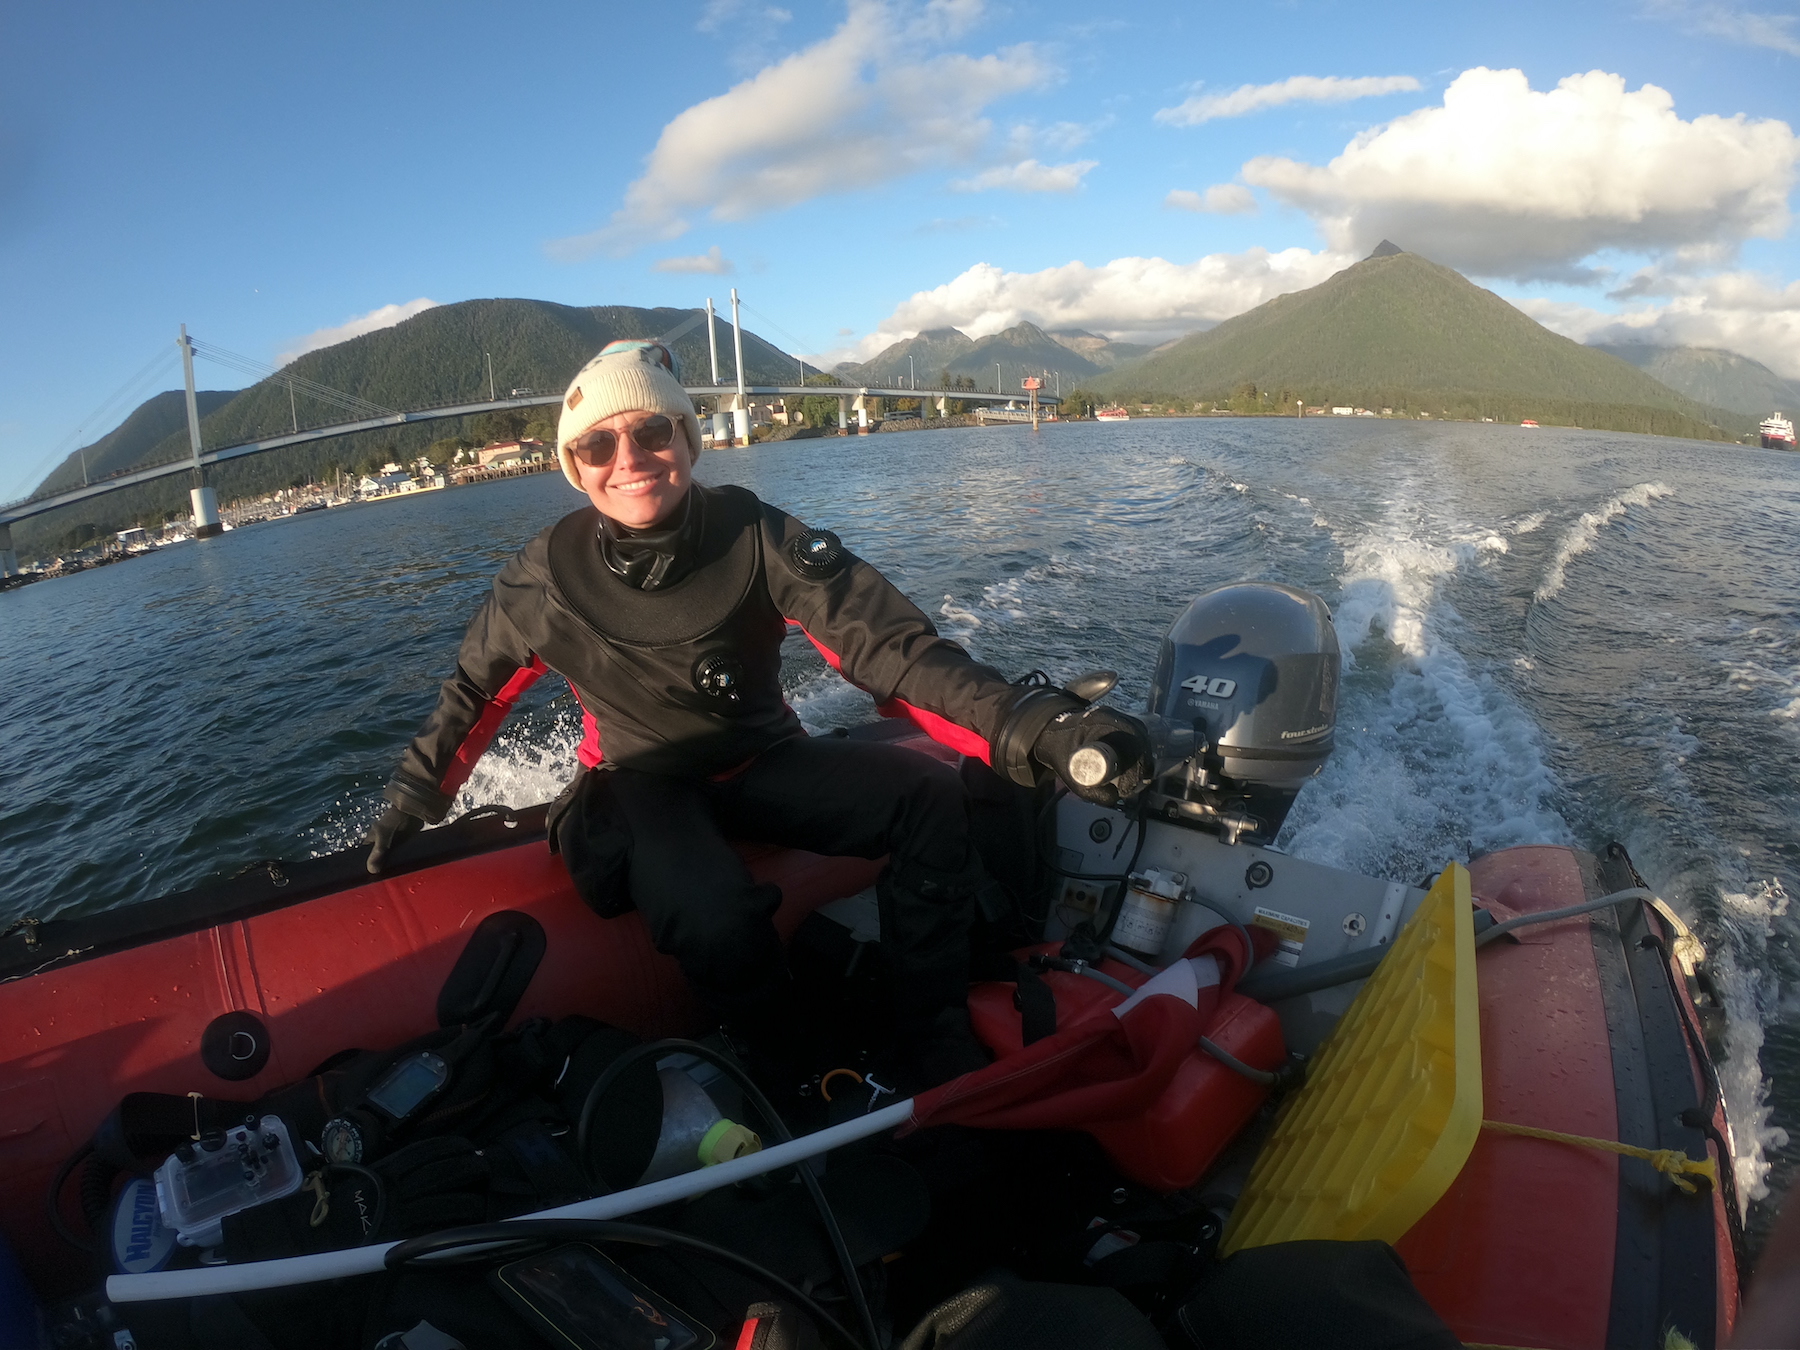 A woman in diving gear and a white knit cap sits on one tube of a red inflatable boat while driving the craft with a 40-horsepower outboard motor. A town, a marina, a suspension bridge, a ship and cloud-topped mountains are in the background on a mostly sunny day.